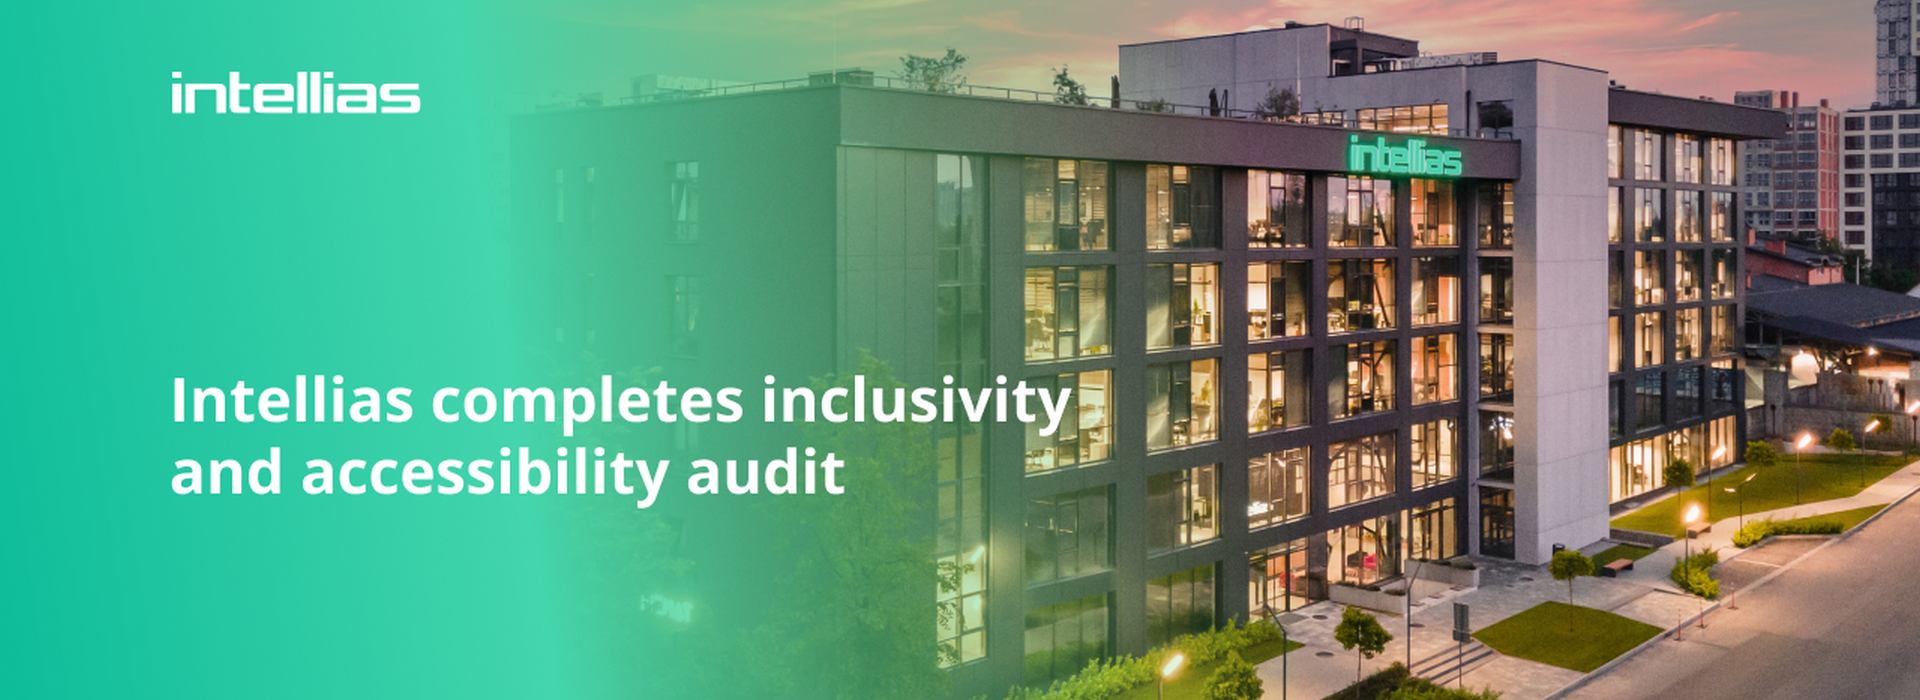 Intellias Completes Inclusivity and Accessibility Audit